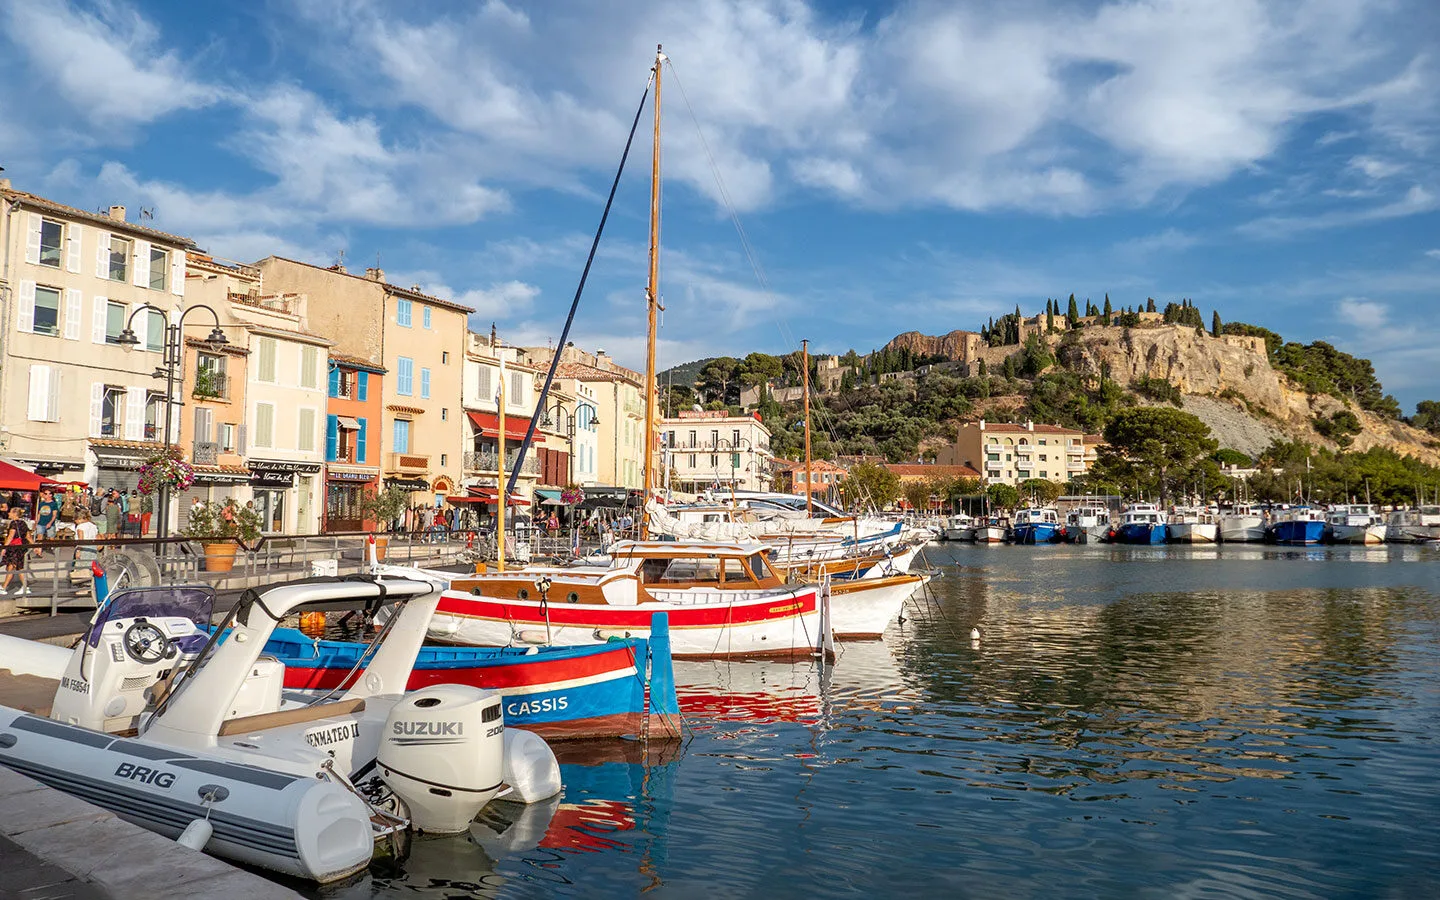 Cassis harbour in the South of France